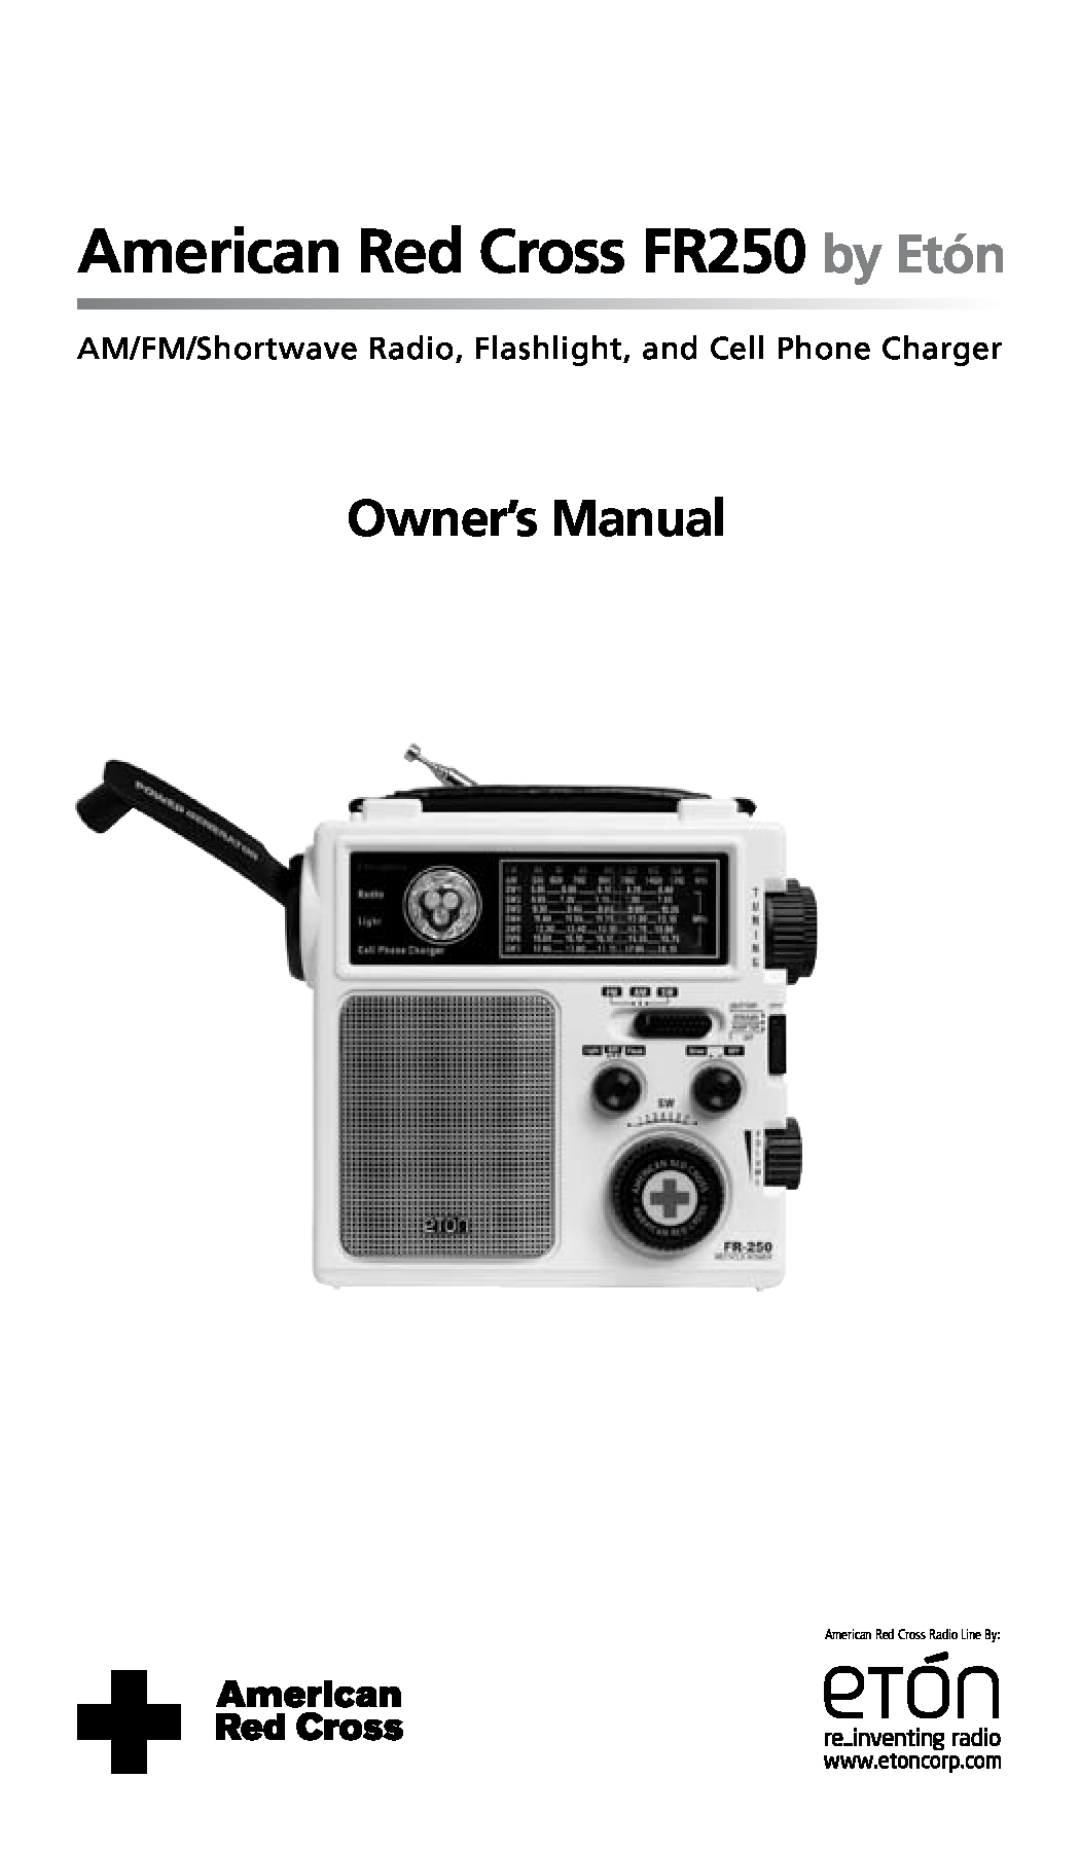 Eton FR250 owner manual AM/FM/Shortwave Radio, Flashlight, and Cell Phone Charger 